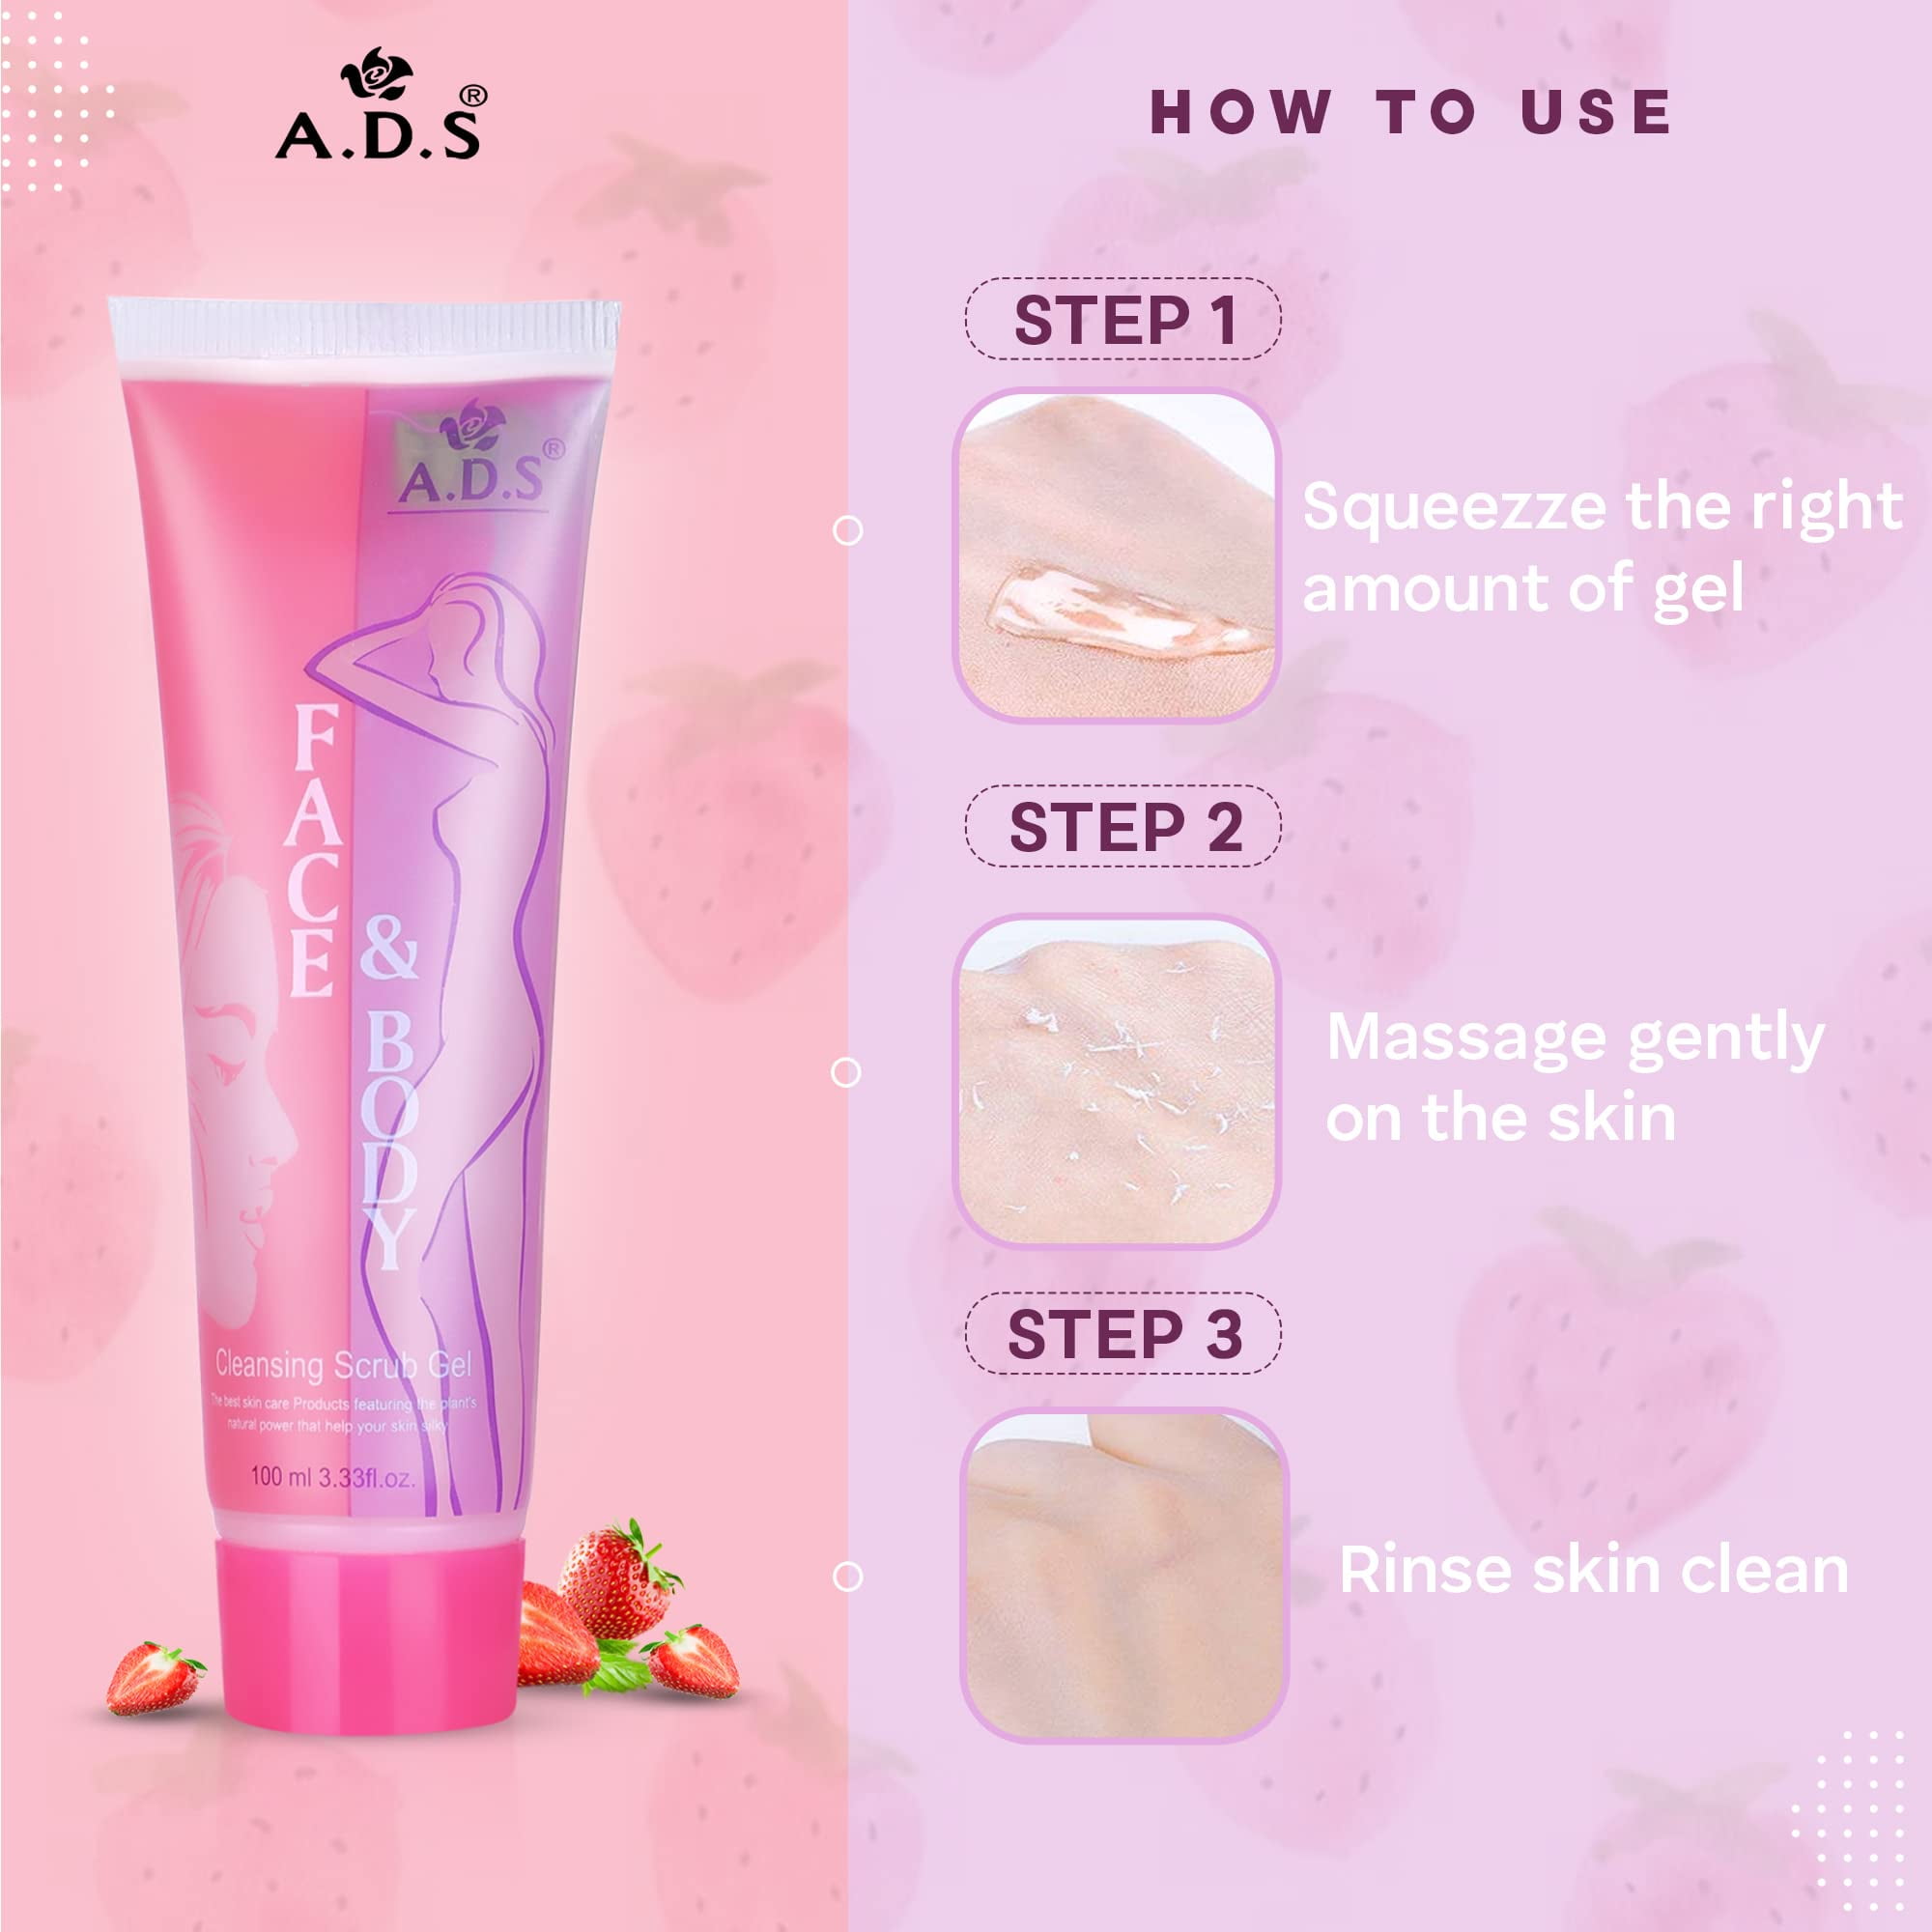 ads face and body scrub